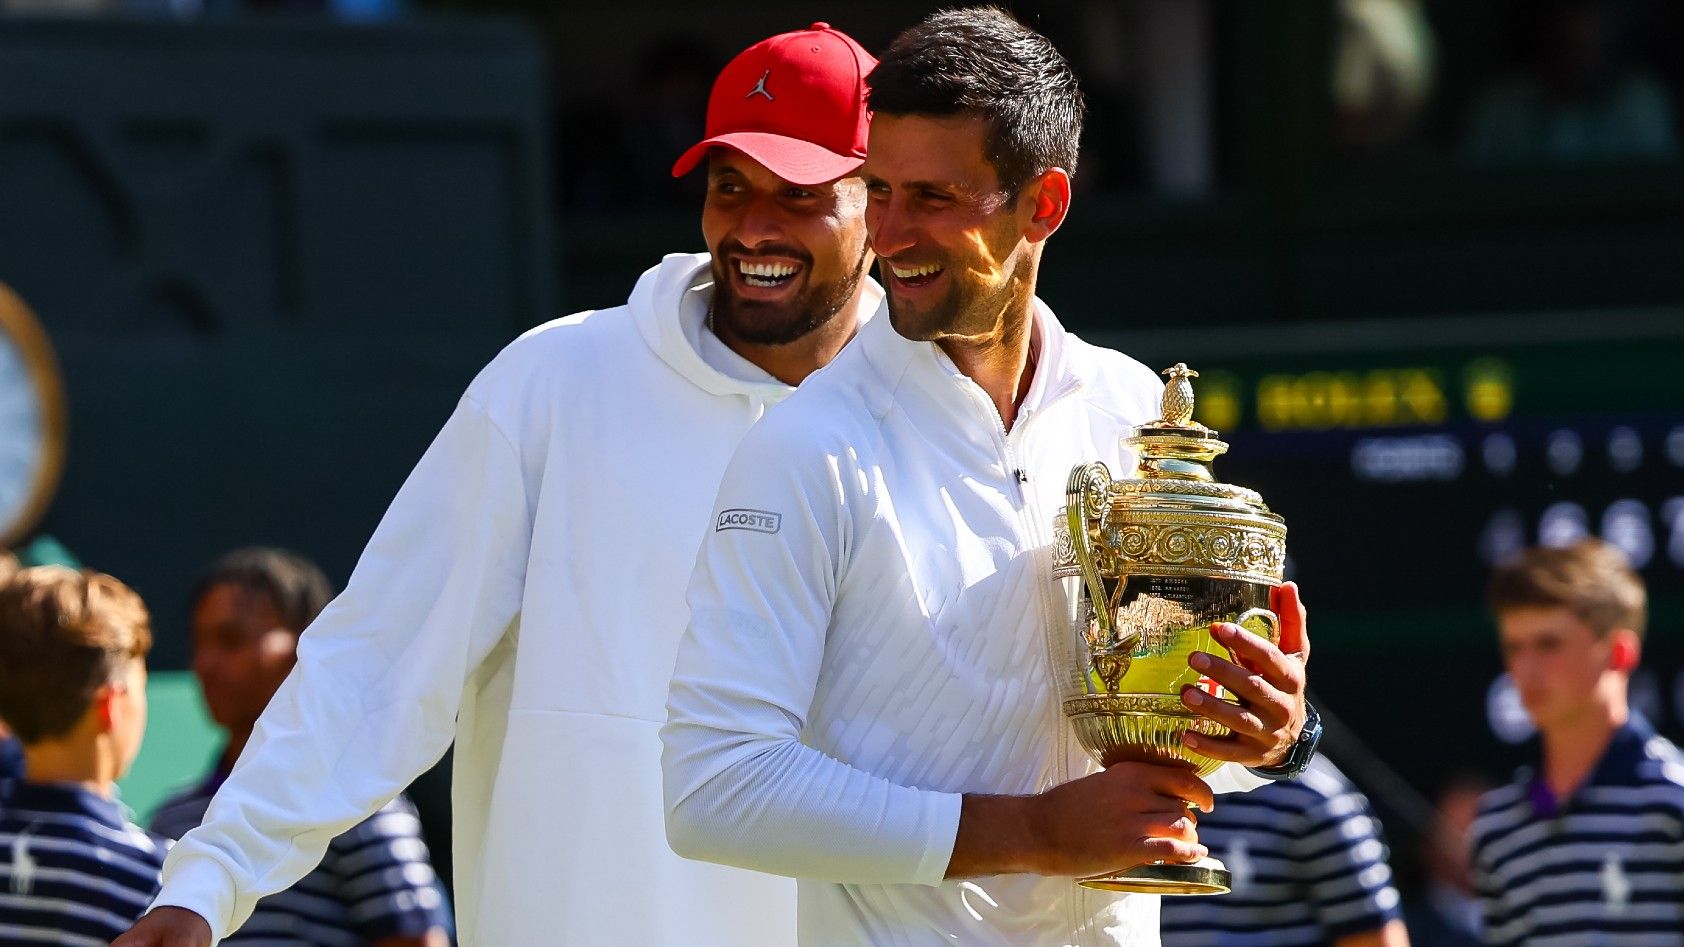 Djokovic confirms 'bromance' in light-hearted on-court victory interview